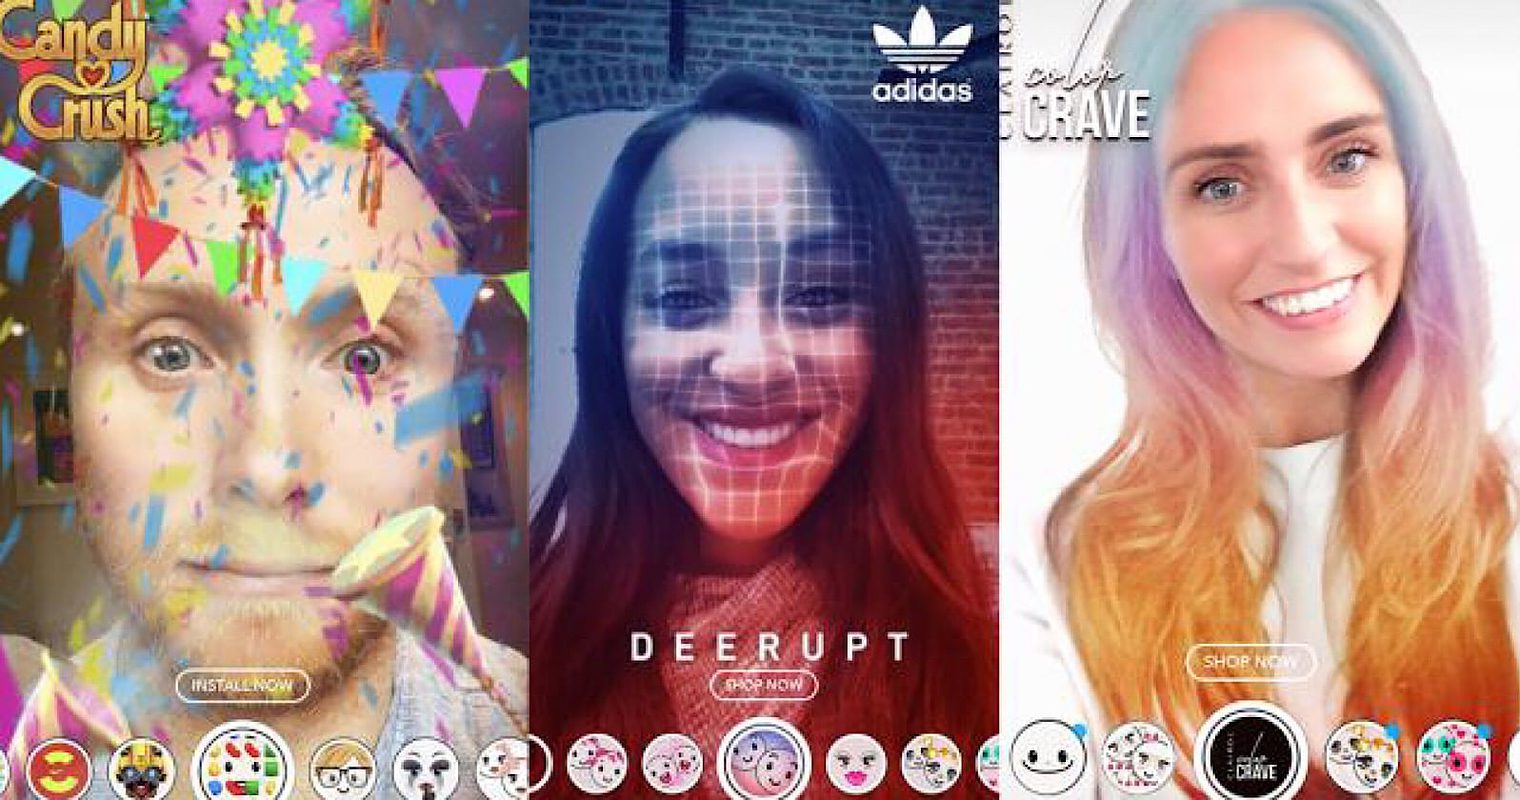 Snapchat Integrates Shopping Ads Into AR Lenses